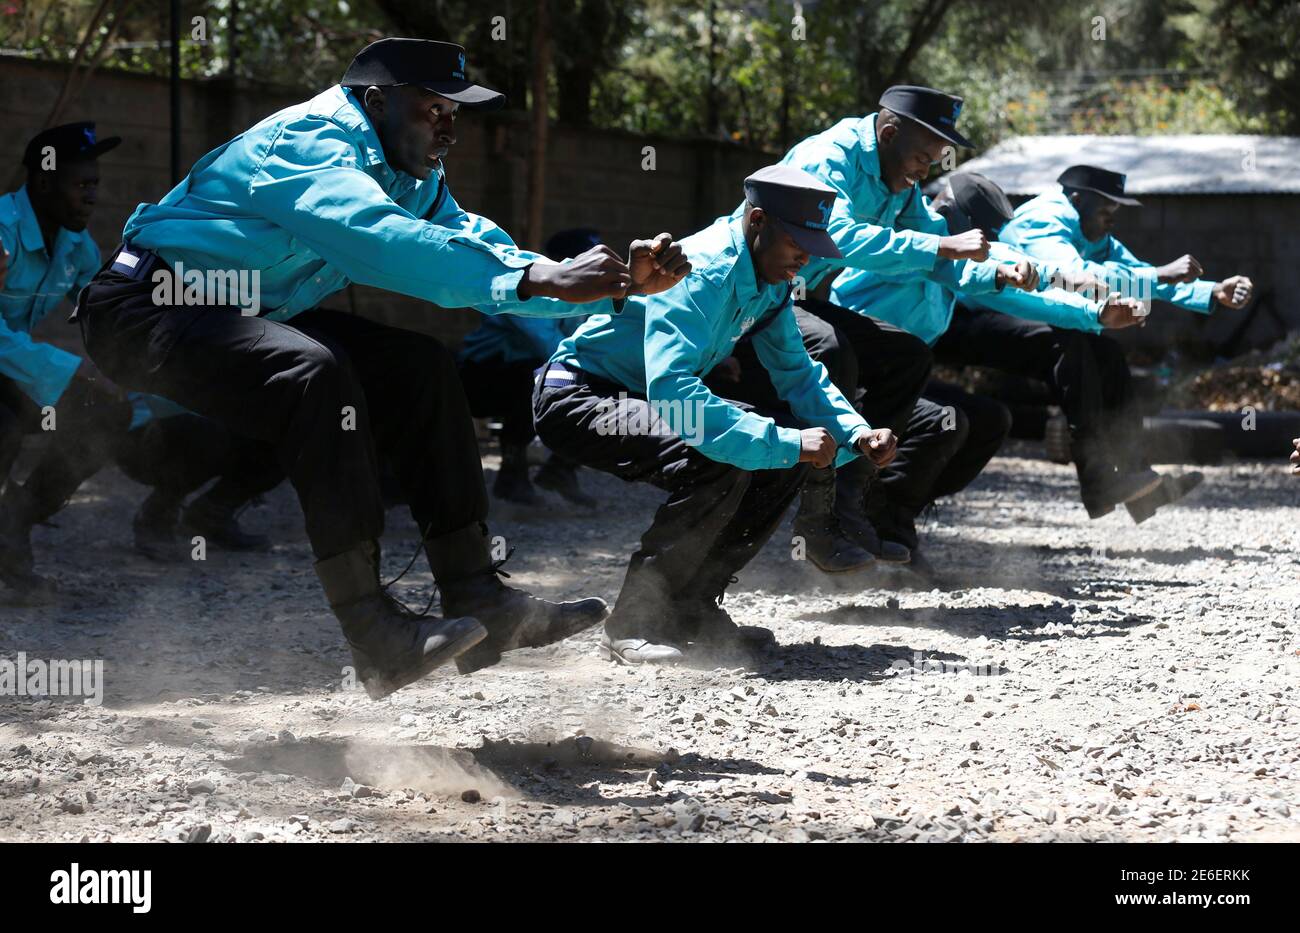 Kenyan security guards participate in physical exercise during martial arts combat training at the Chinese-run Deway Security Group compound in Kenya's capital Nairobi, March 13, 2017. REUTERS/Thomas Mukoya Stock Photo